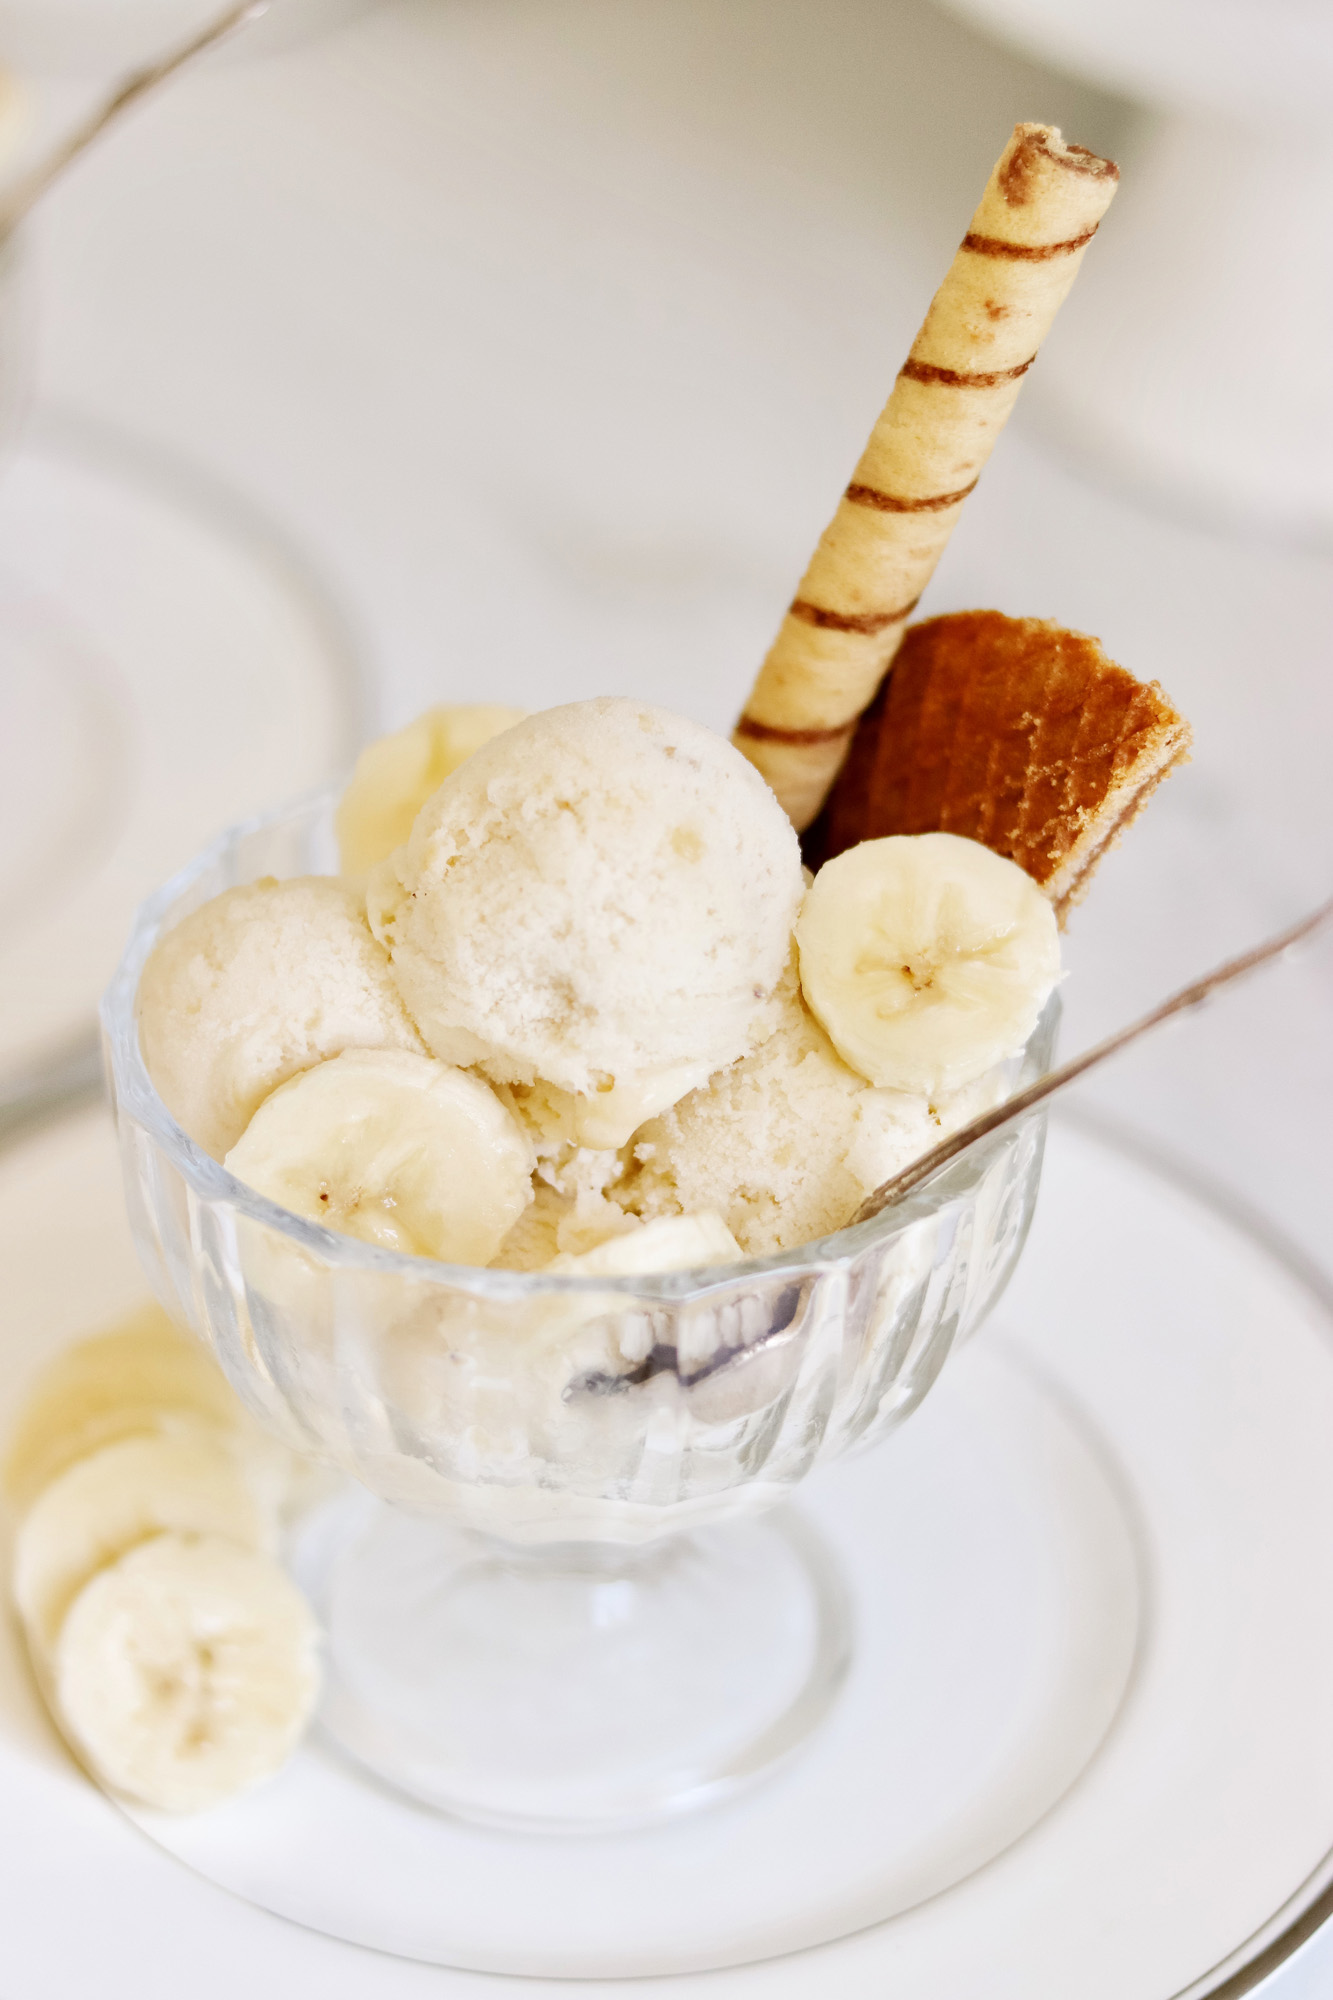 Banana Ice Cream Recipe - Jeff's homemade recipe that is both delicious and fun for all! You can make it full-fat or low-fat, even sugar-free. | Kristy Wicks